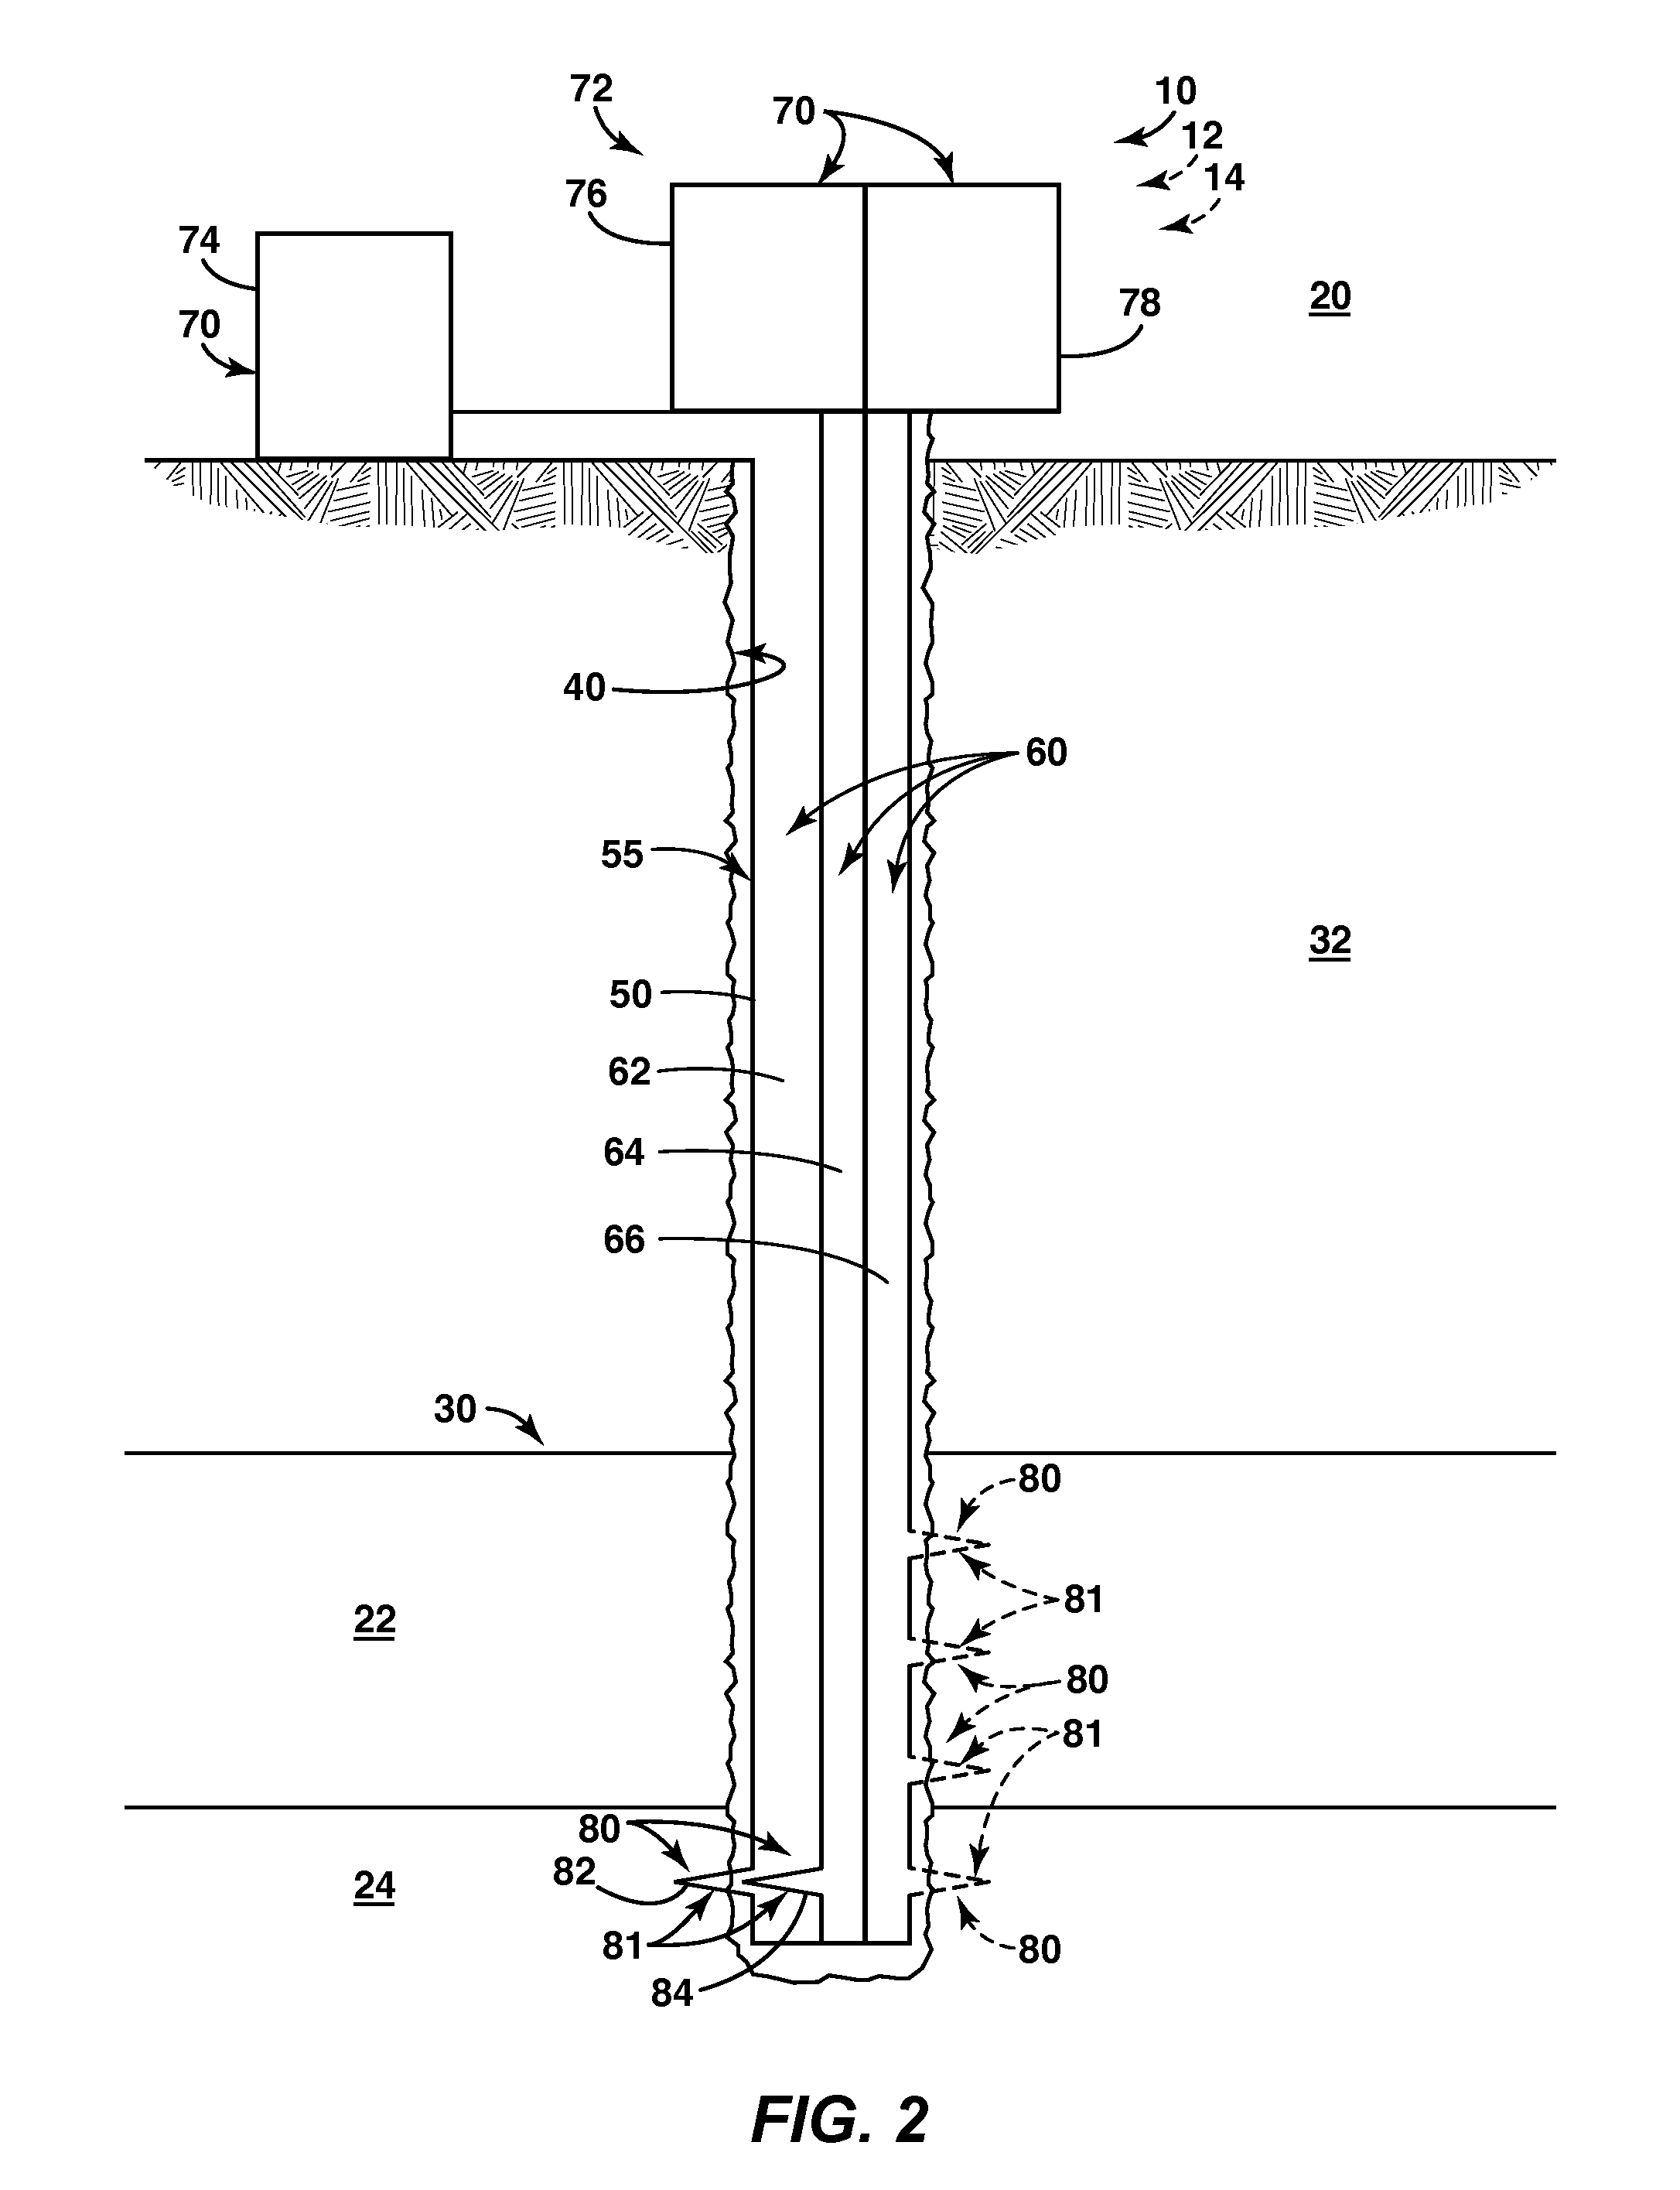 Systems and Methods For Advanced Well Access to Subterranean Formations